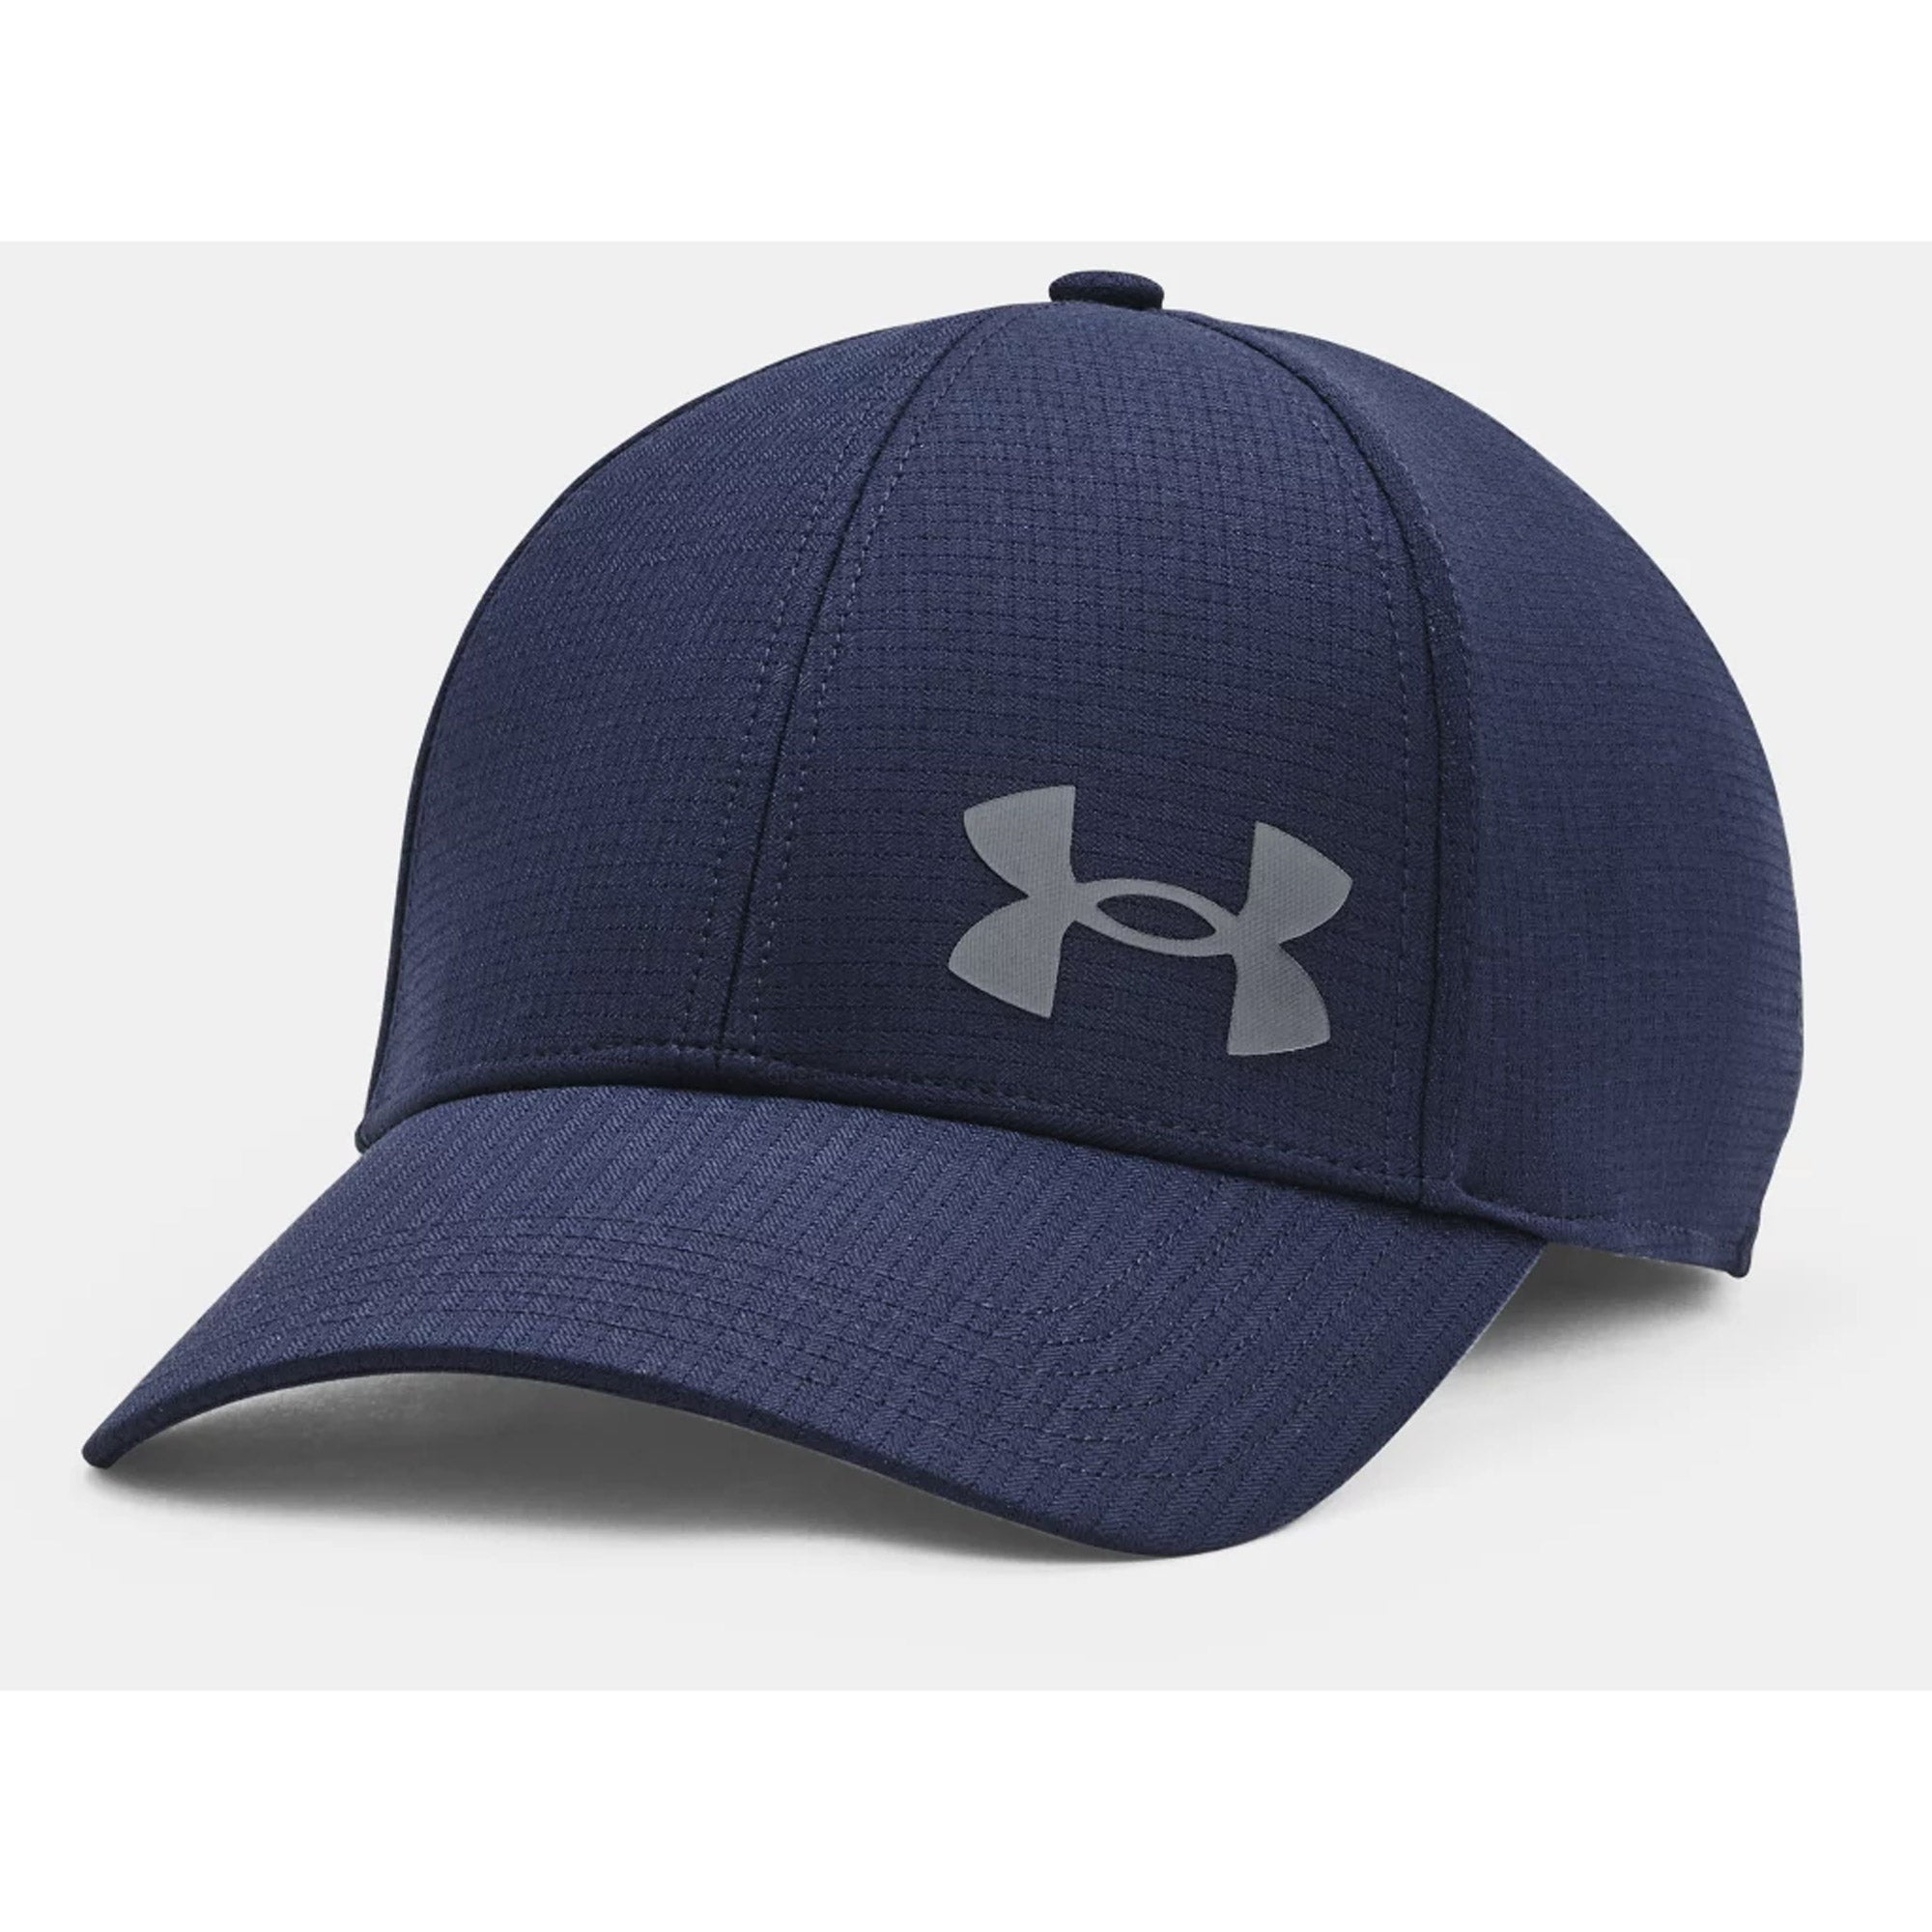 Under Armour 1361530-408 UA ArmourVent Stetch Cap in Blue Front